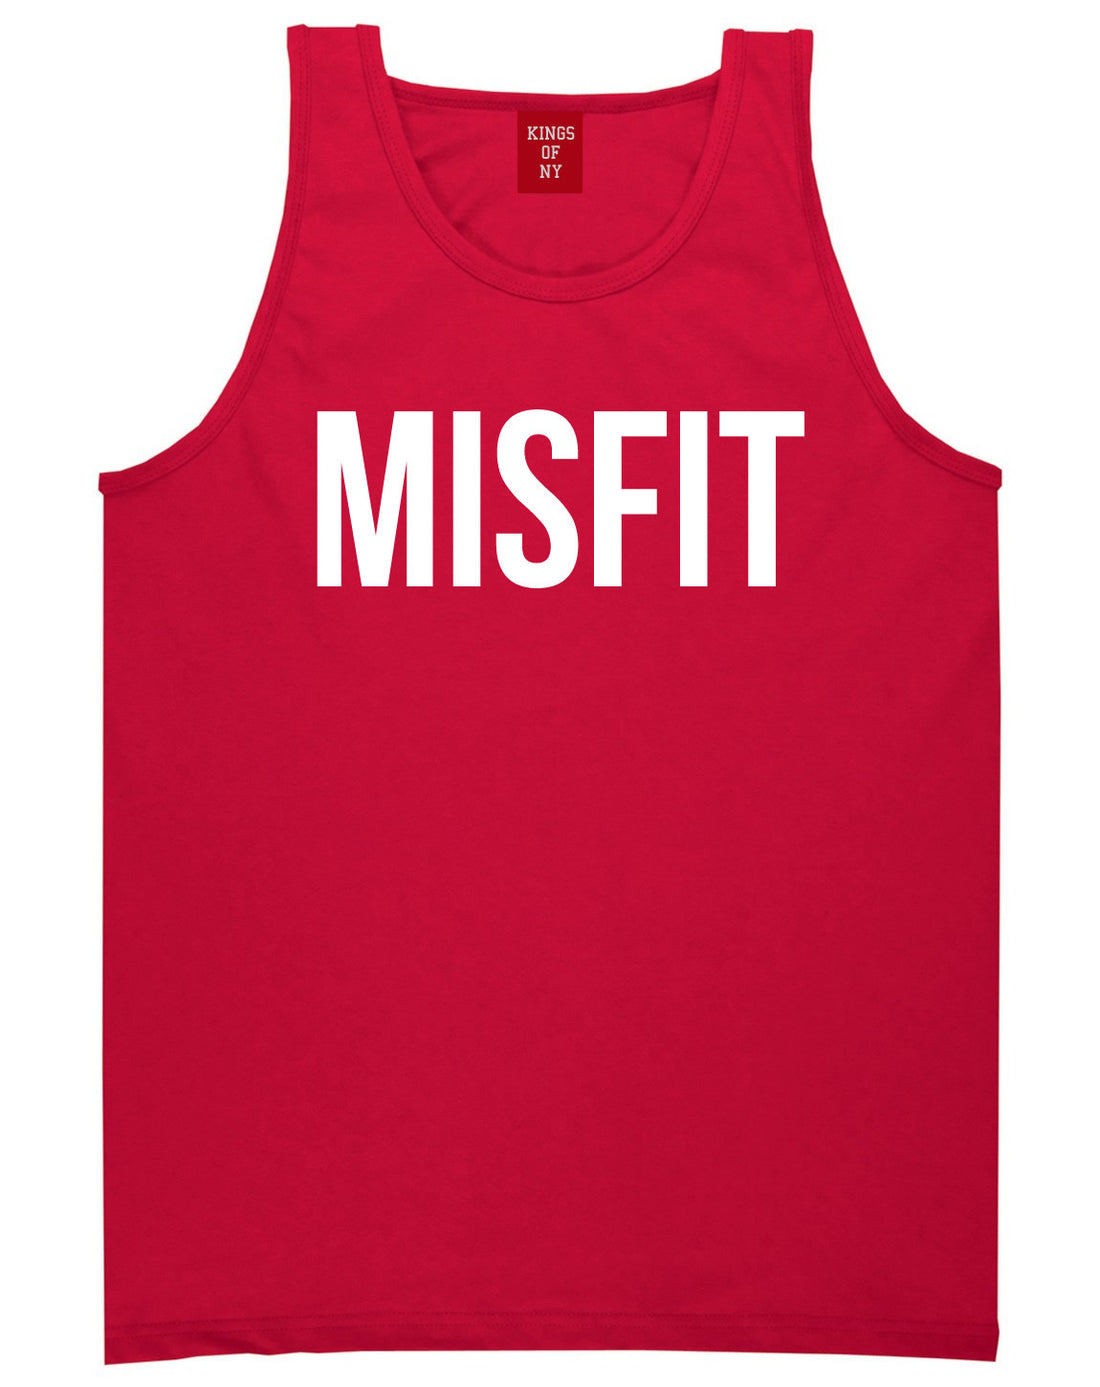 Kings Of NY Misfit Tank Top in Red